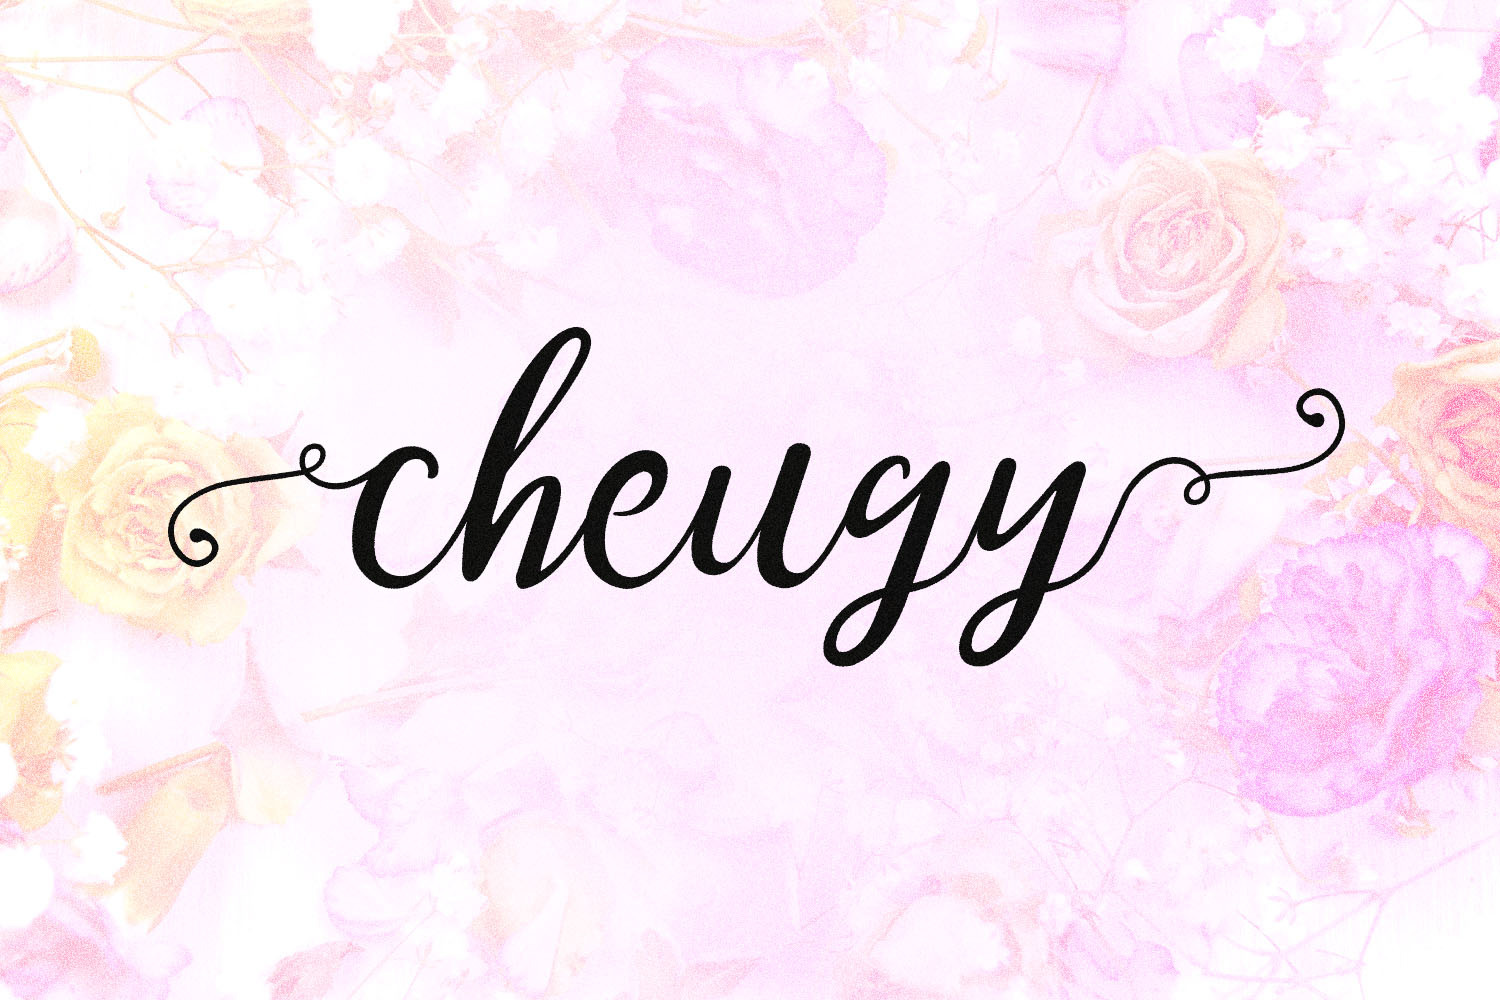 Millennials Are Desperately Trying to Make “Cheugy” Happen. It Won’t.